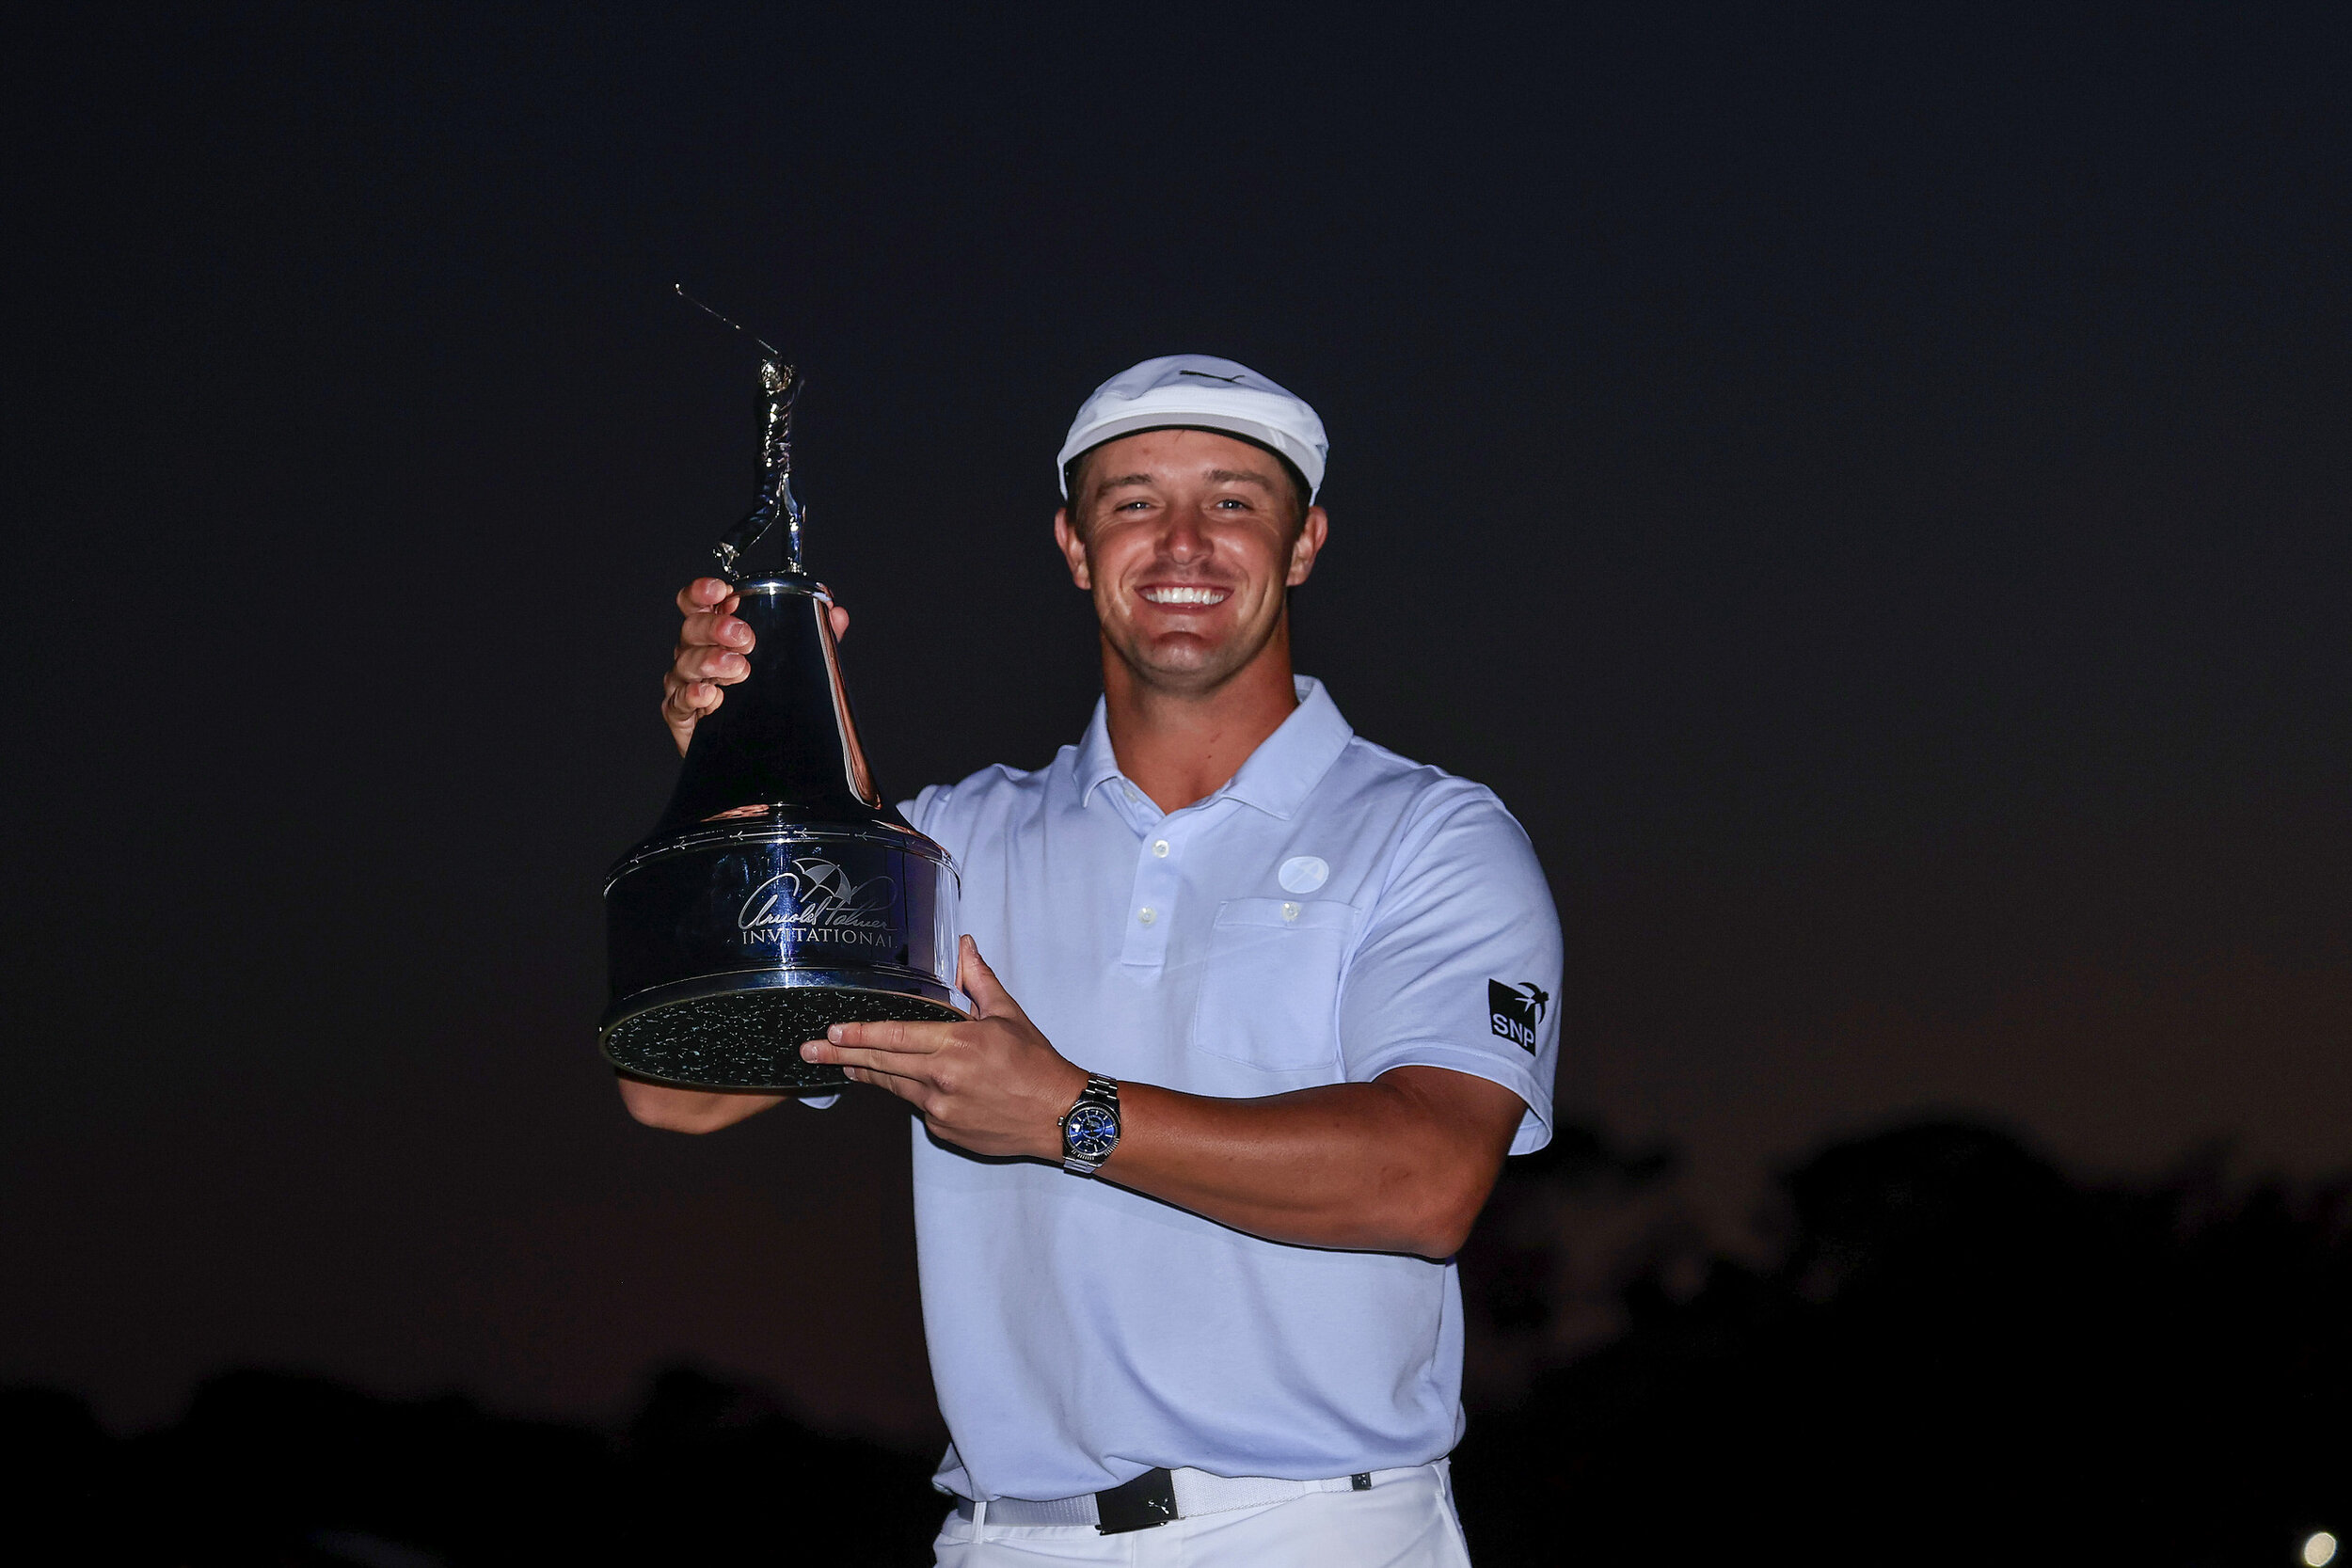  ORLANDO, FLORIDA - MARCH 07: Bryson DeChambeau of the United States celebrates with the trophy after winning the final round of the Arnold Palmer Invitational Presented by MasterCard at the Bay Hill Club and Lodge on March 07, 2021 in Orlando, Flori